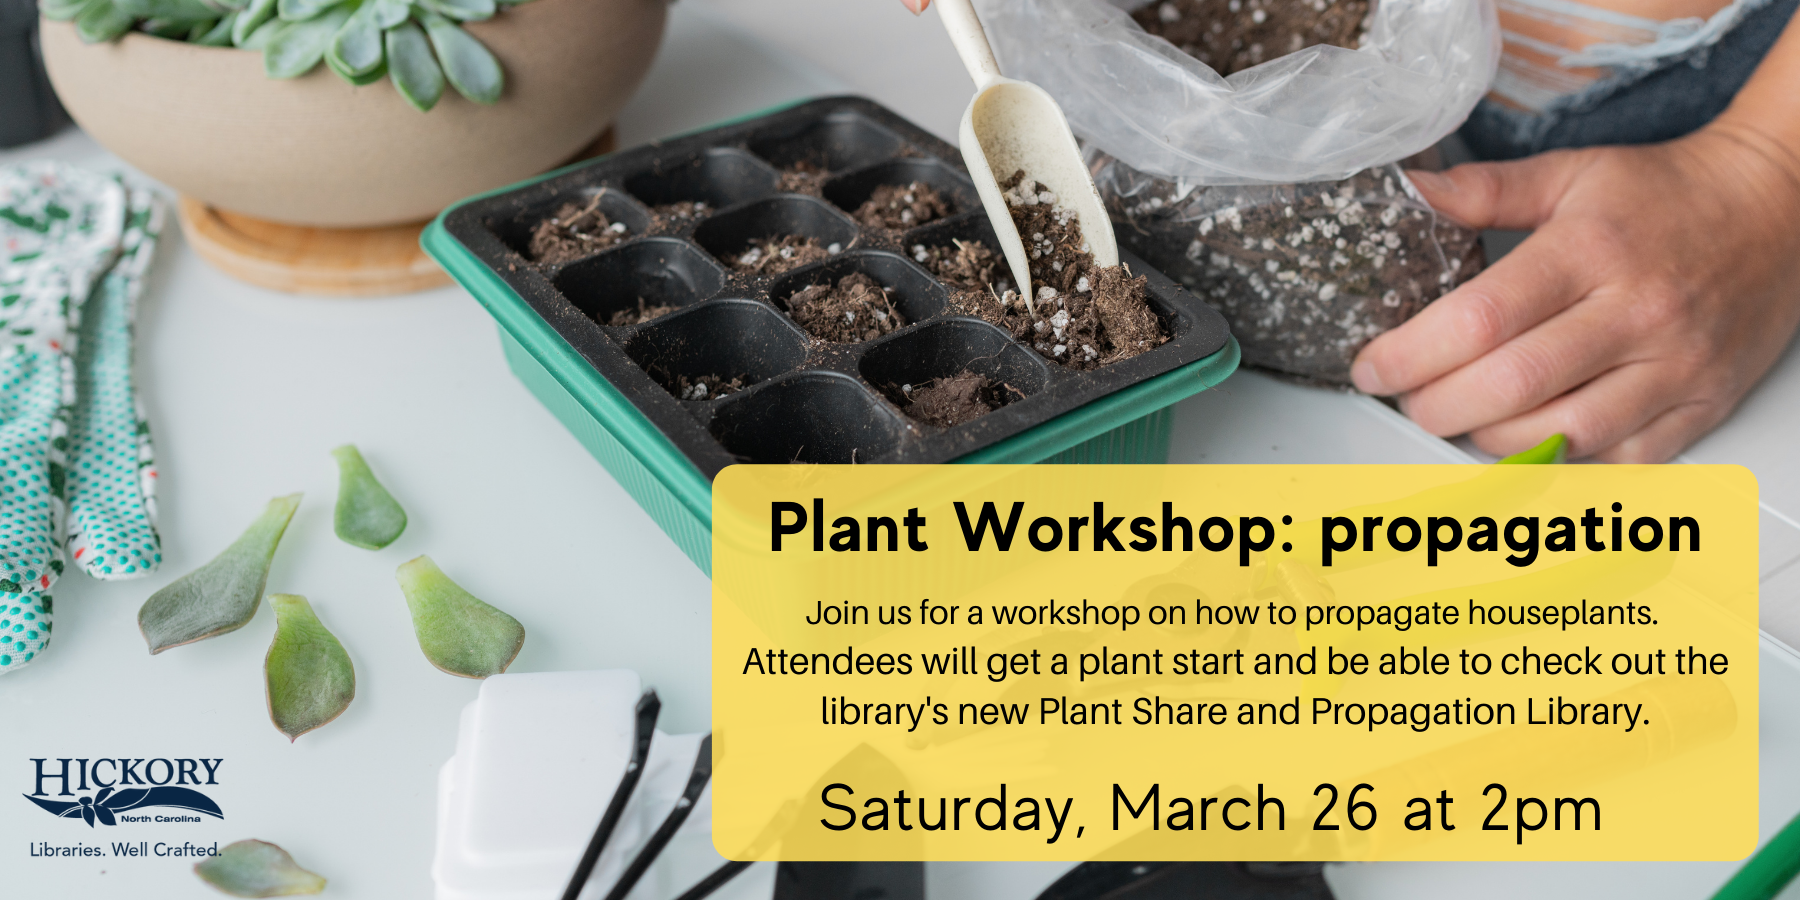 plant workshop flyer with image a person  working with soil